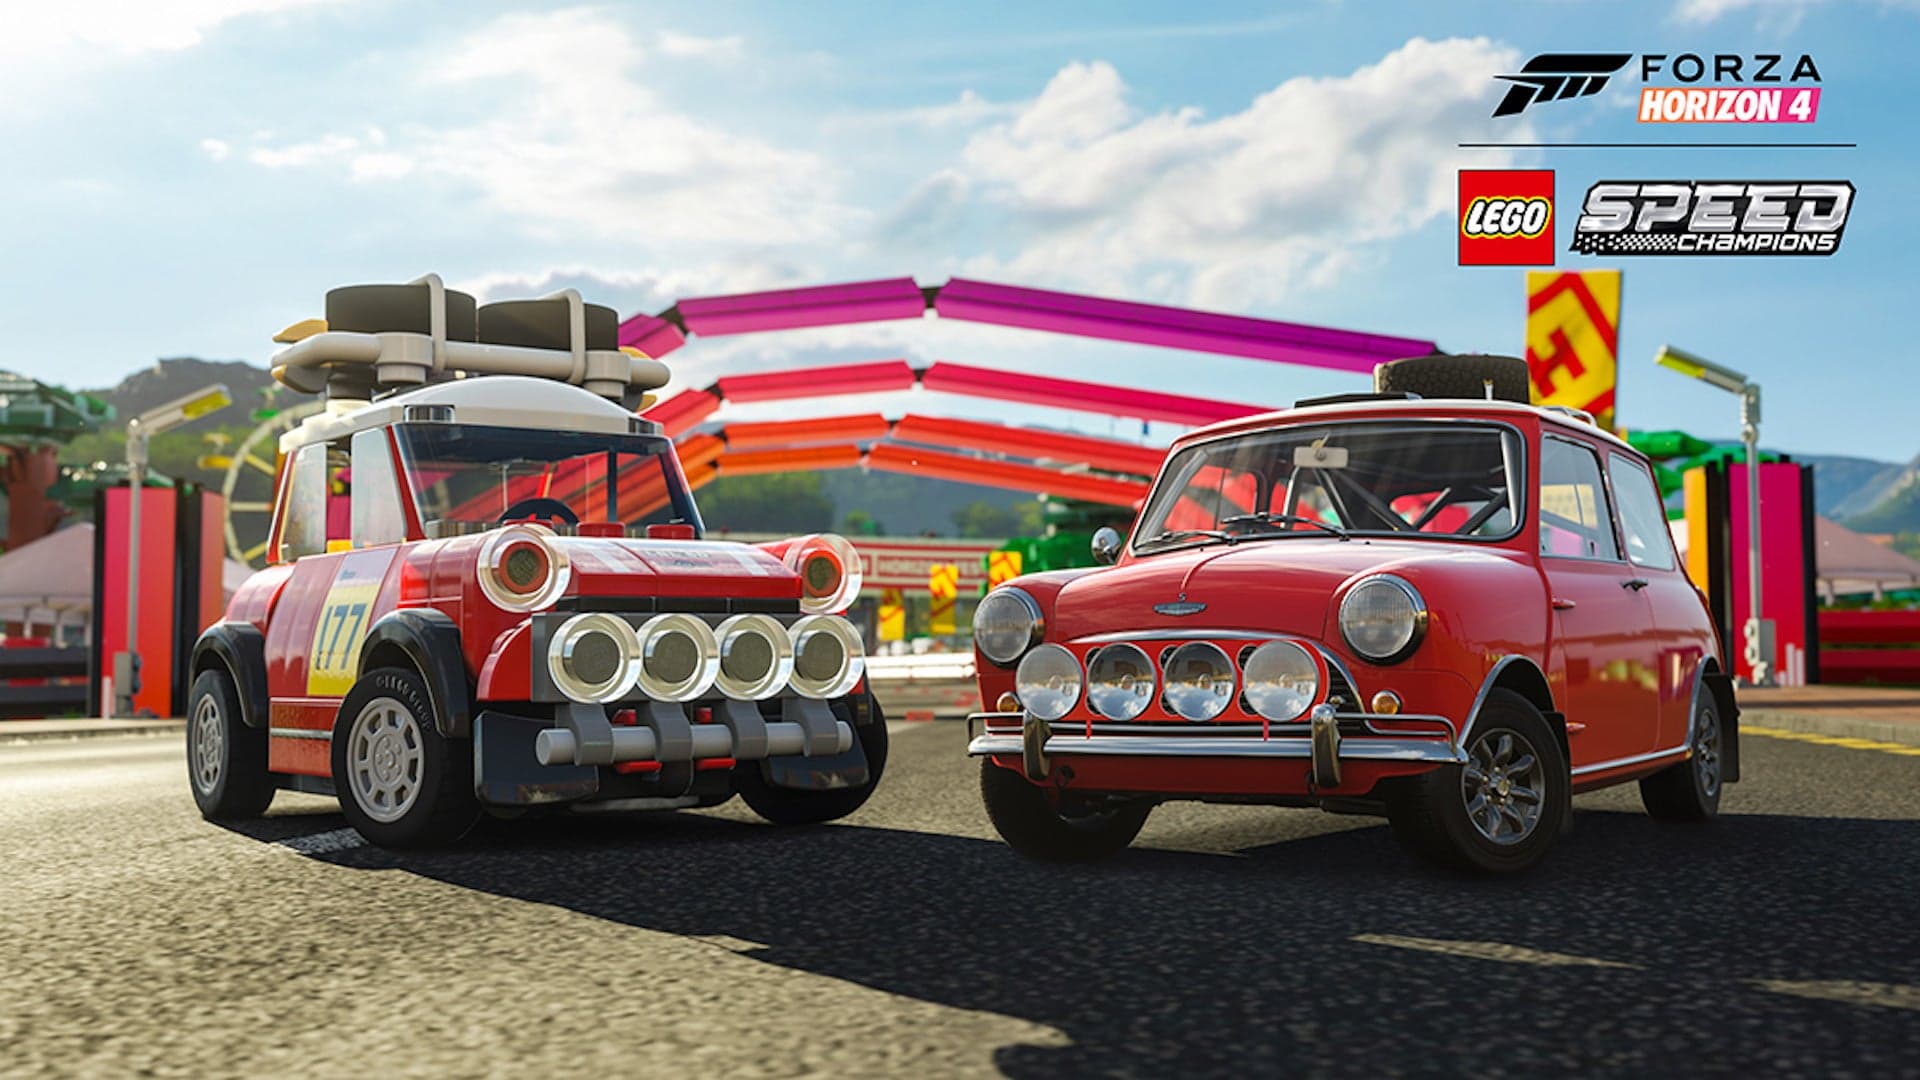 New Forza Horizon 4 Expansion Lets You Hoon Lego Cars in a Massive Lego World